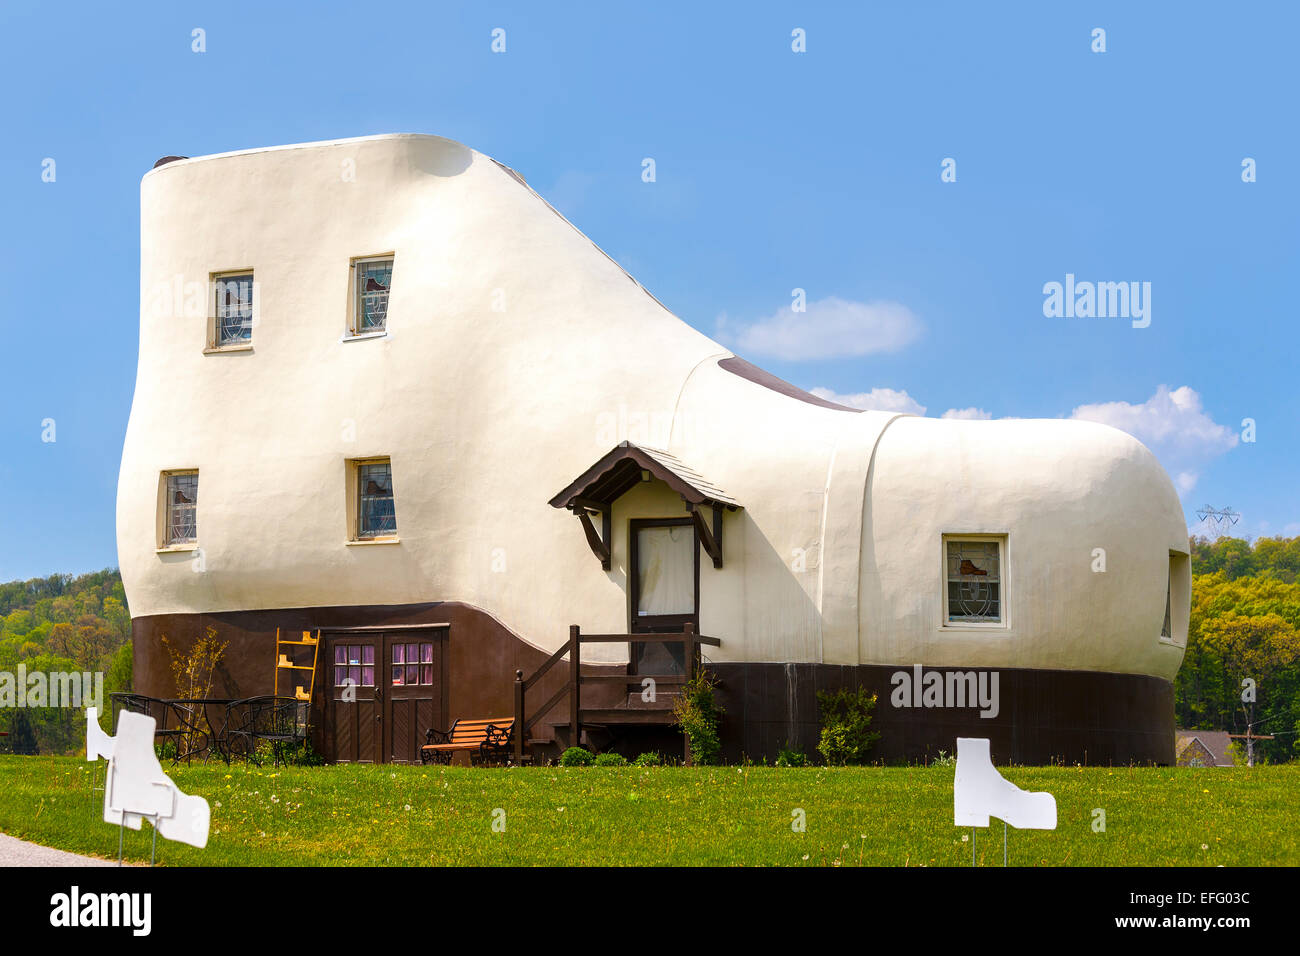 Haines Shoe House in Hellam Pennsylvania. Roadside attraction novelty building modeled after a work boot. Stock Photo